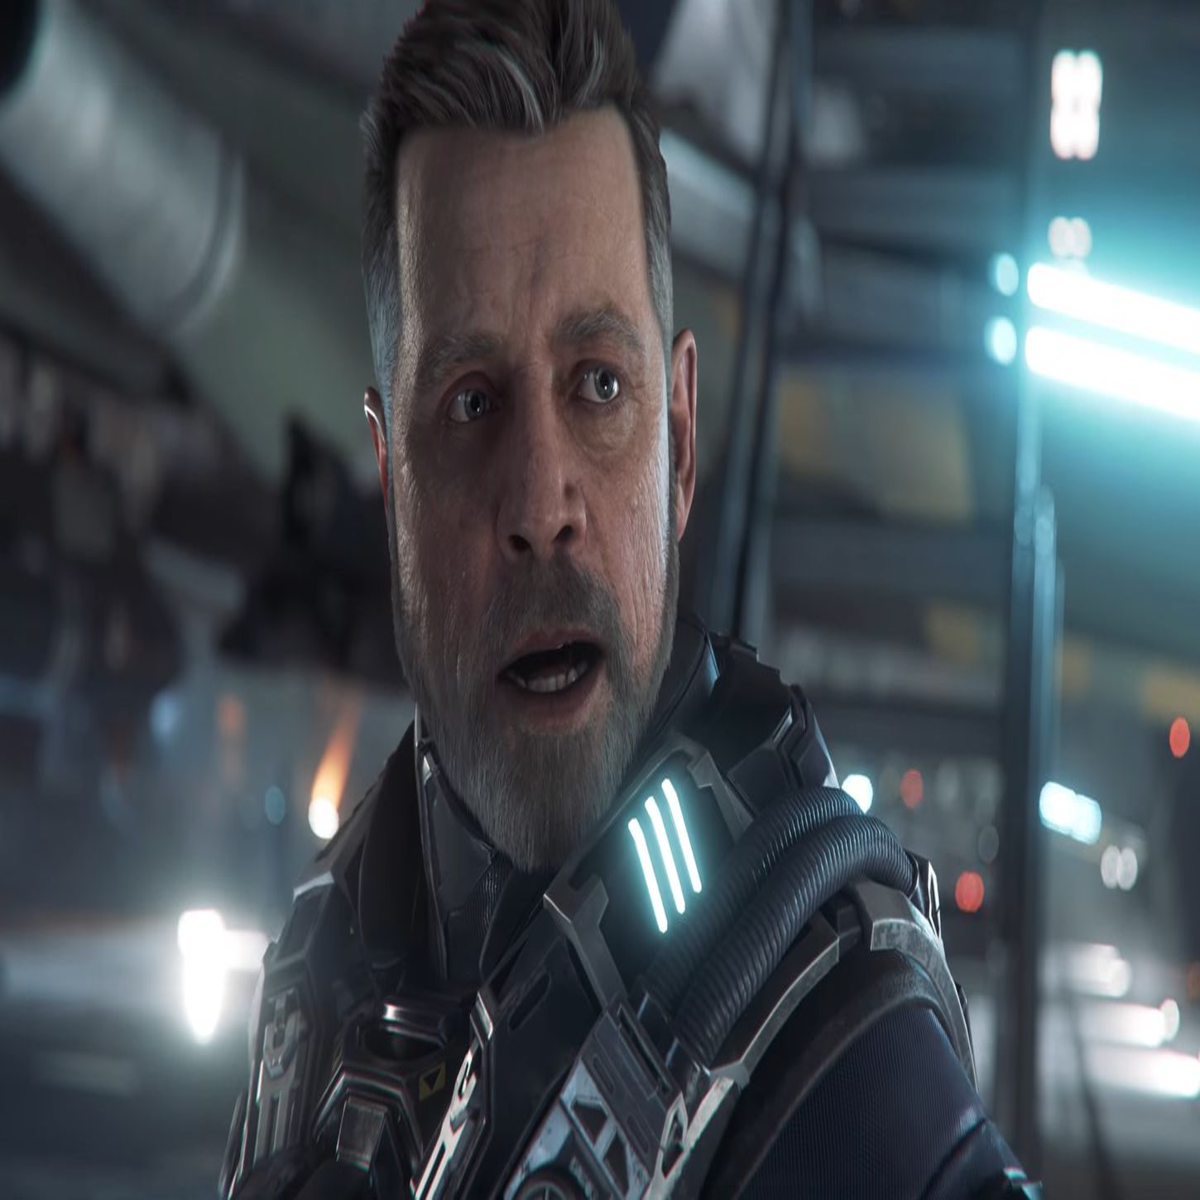 Star Citizen - The next generation of space simulations